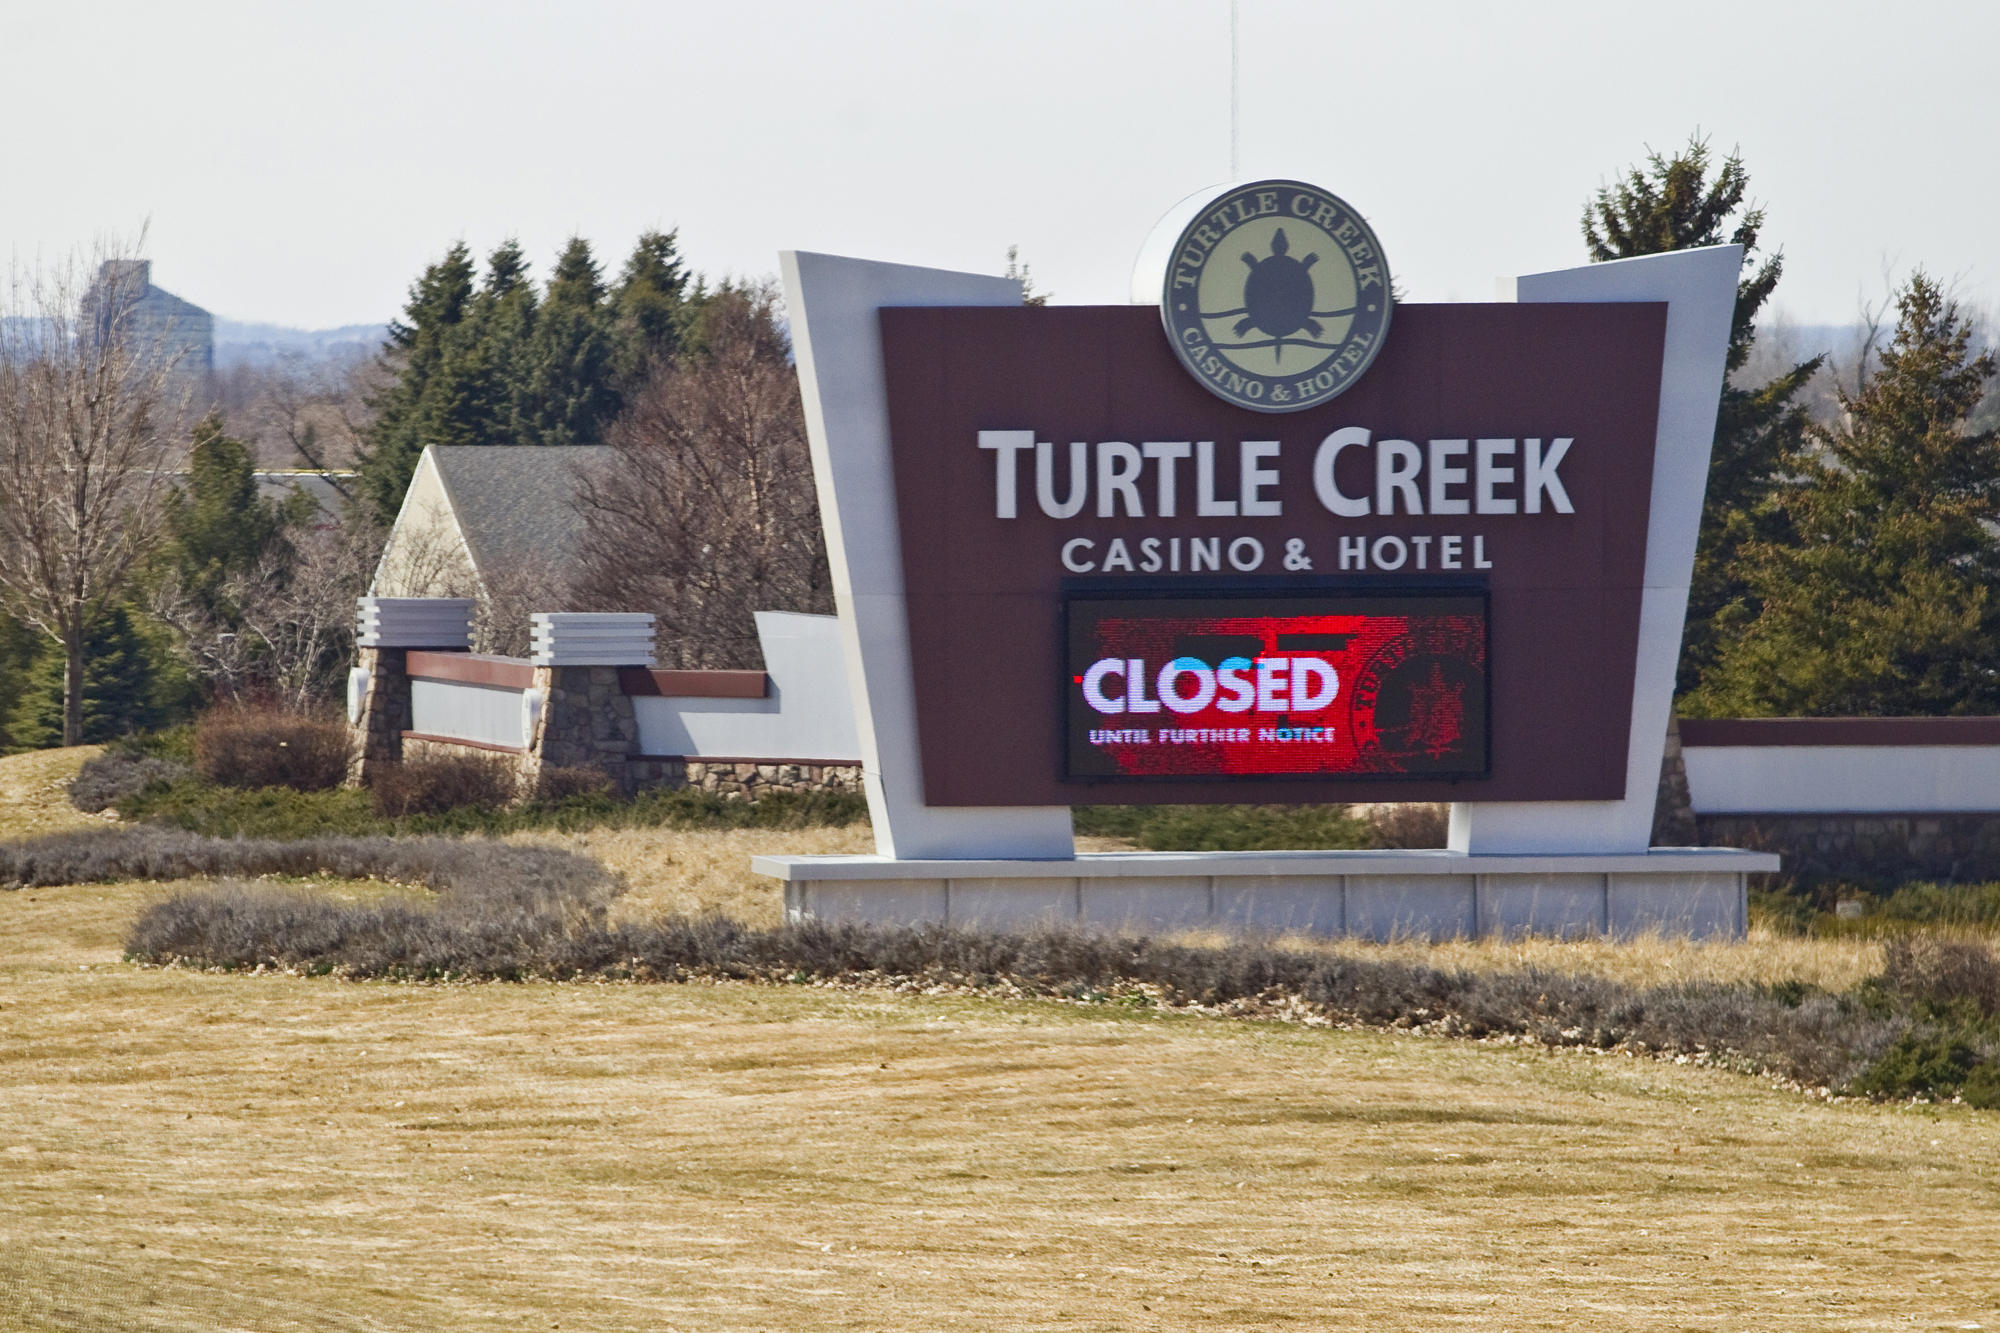 a sign that says 'turtle creek casino & hotel, closed'